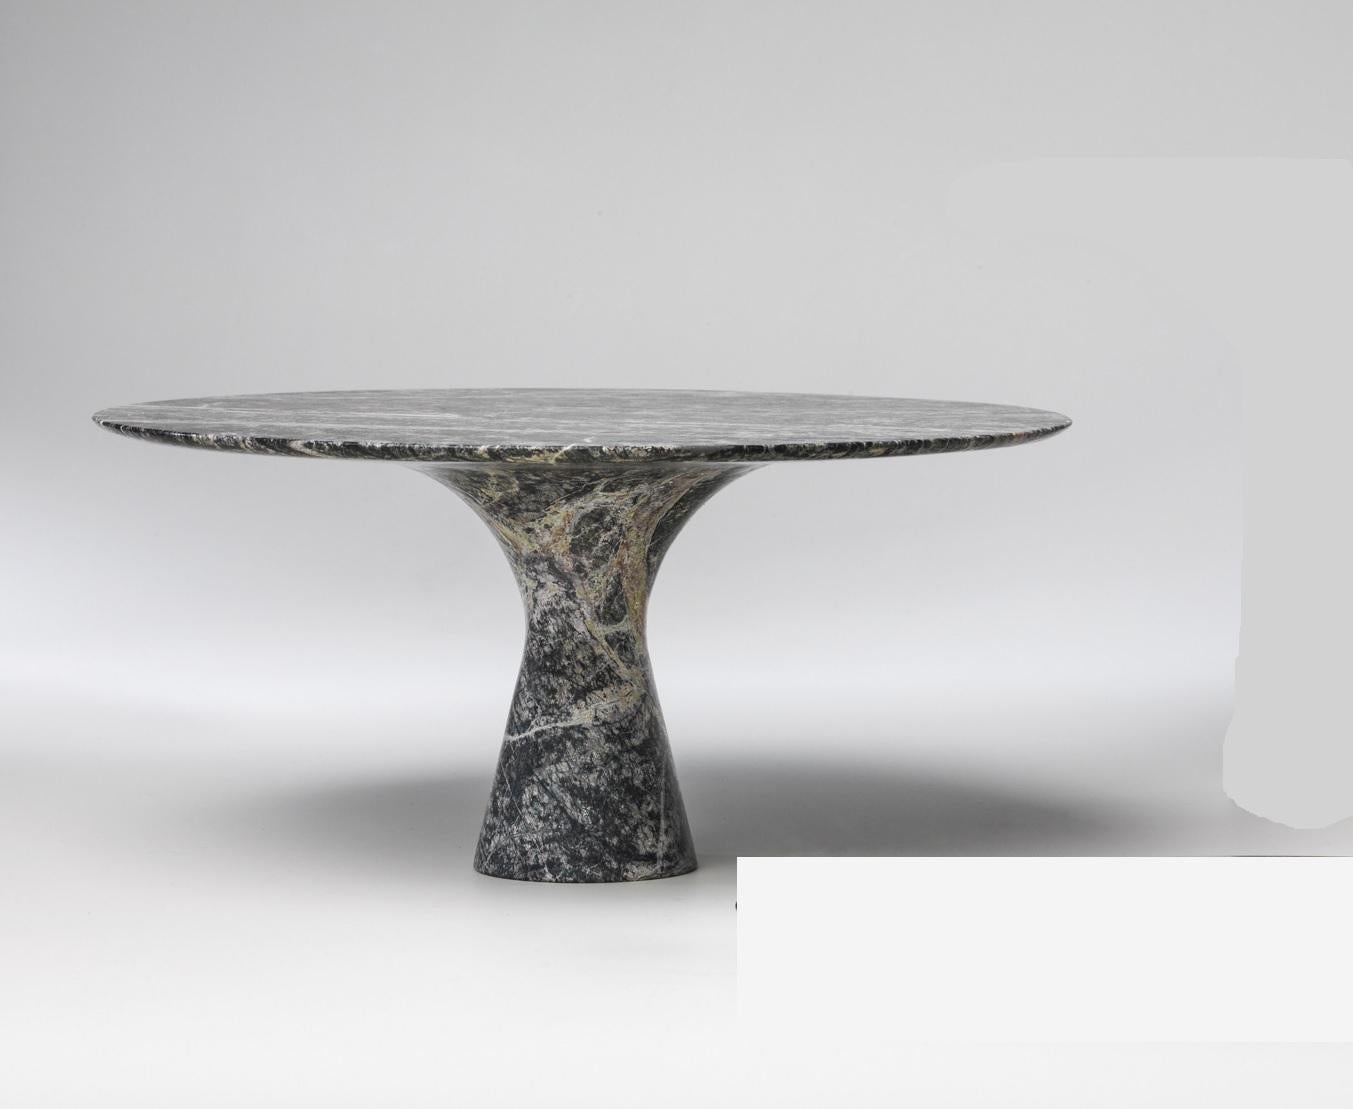 Refined Contemporary Marble 02 Picasso Green Marble Cake Stand
Signed by Leo Aerts.
Dimensions: Diameter 32 x H 15 cm 
Material: Picasso Green Marble
Technique: Polished, Carved. 
Available in Marble: Kyknos, Bianco Statuarietto, Grey Saint Laurent,